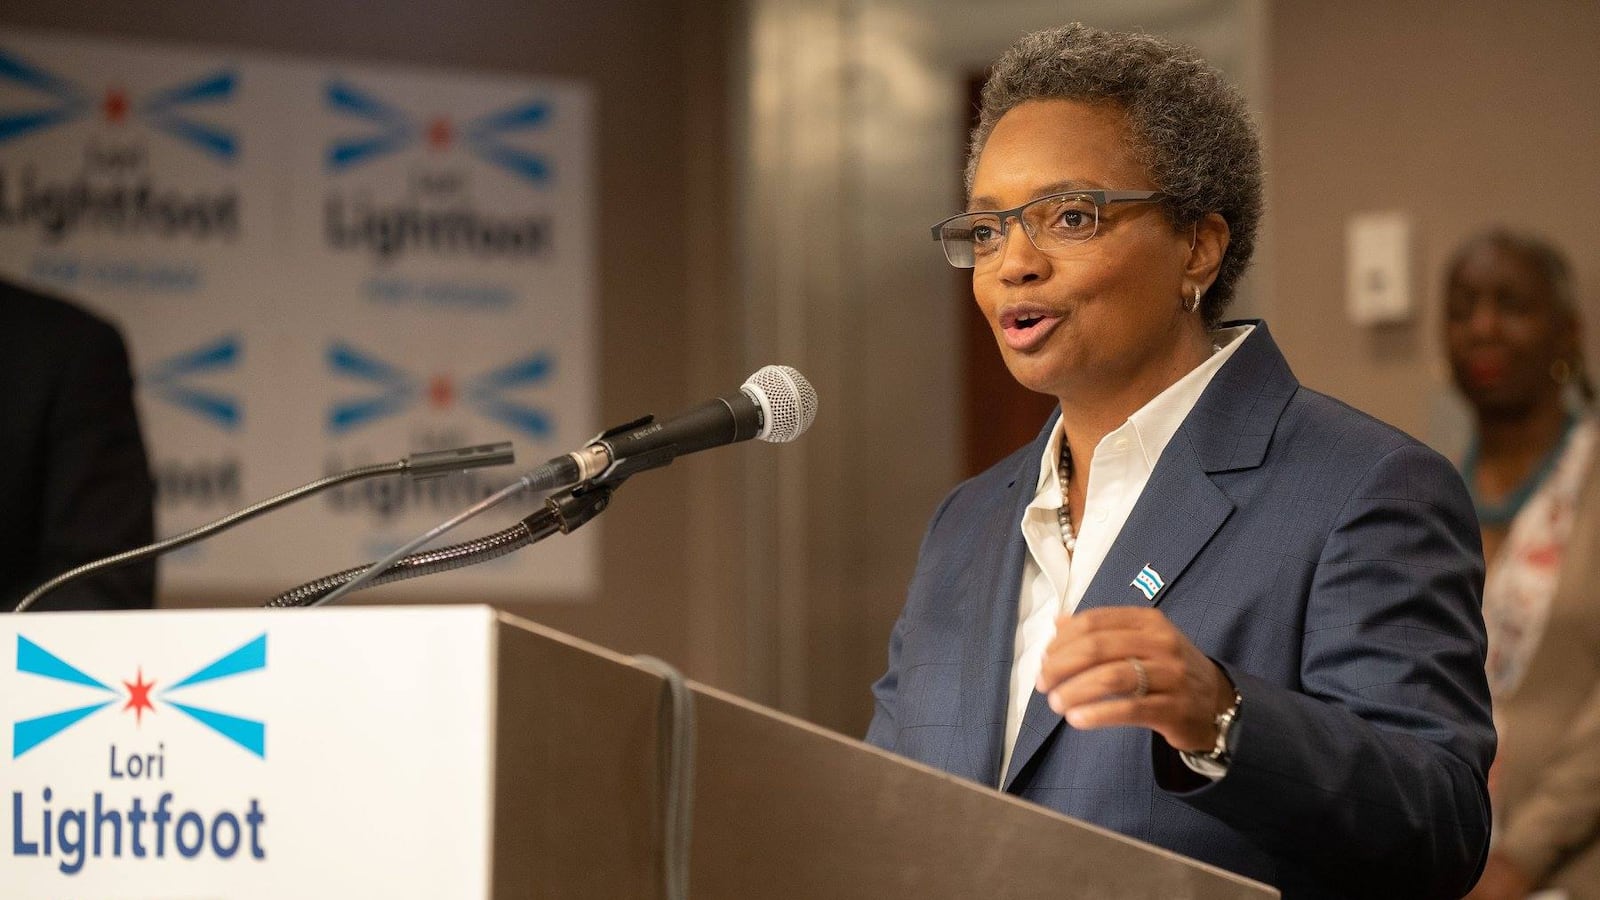 Mayoral candidate Lori Lightfoot unveiling her 15-point education plan in January at the Union League Club of Chicago. Her spokeswoman said the plan will help guide her education transition team.